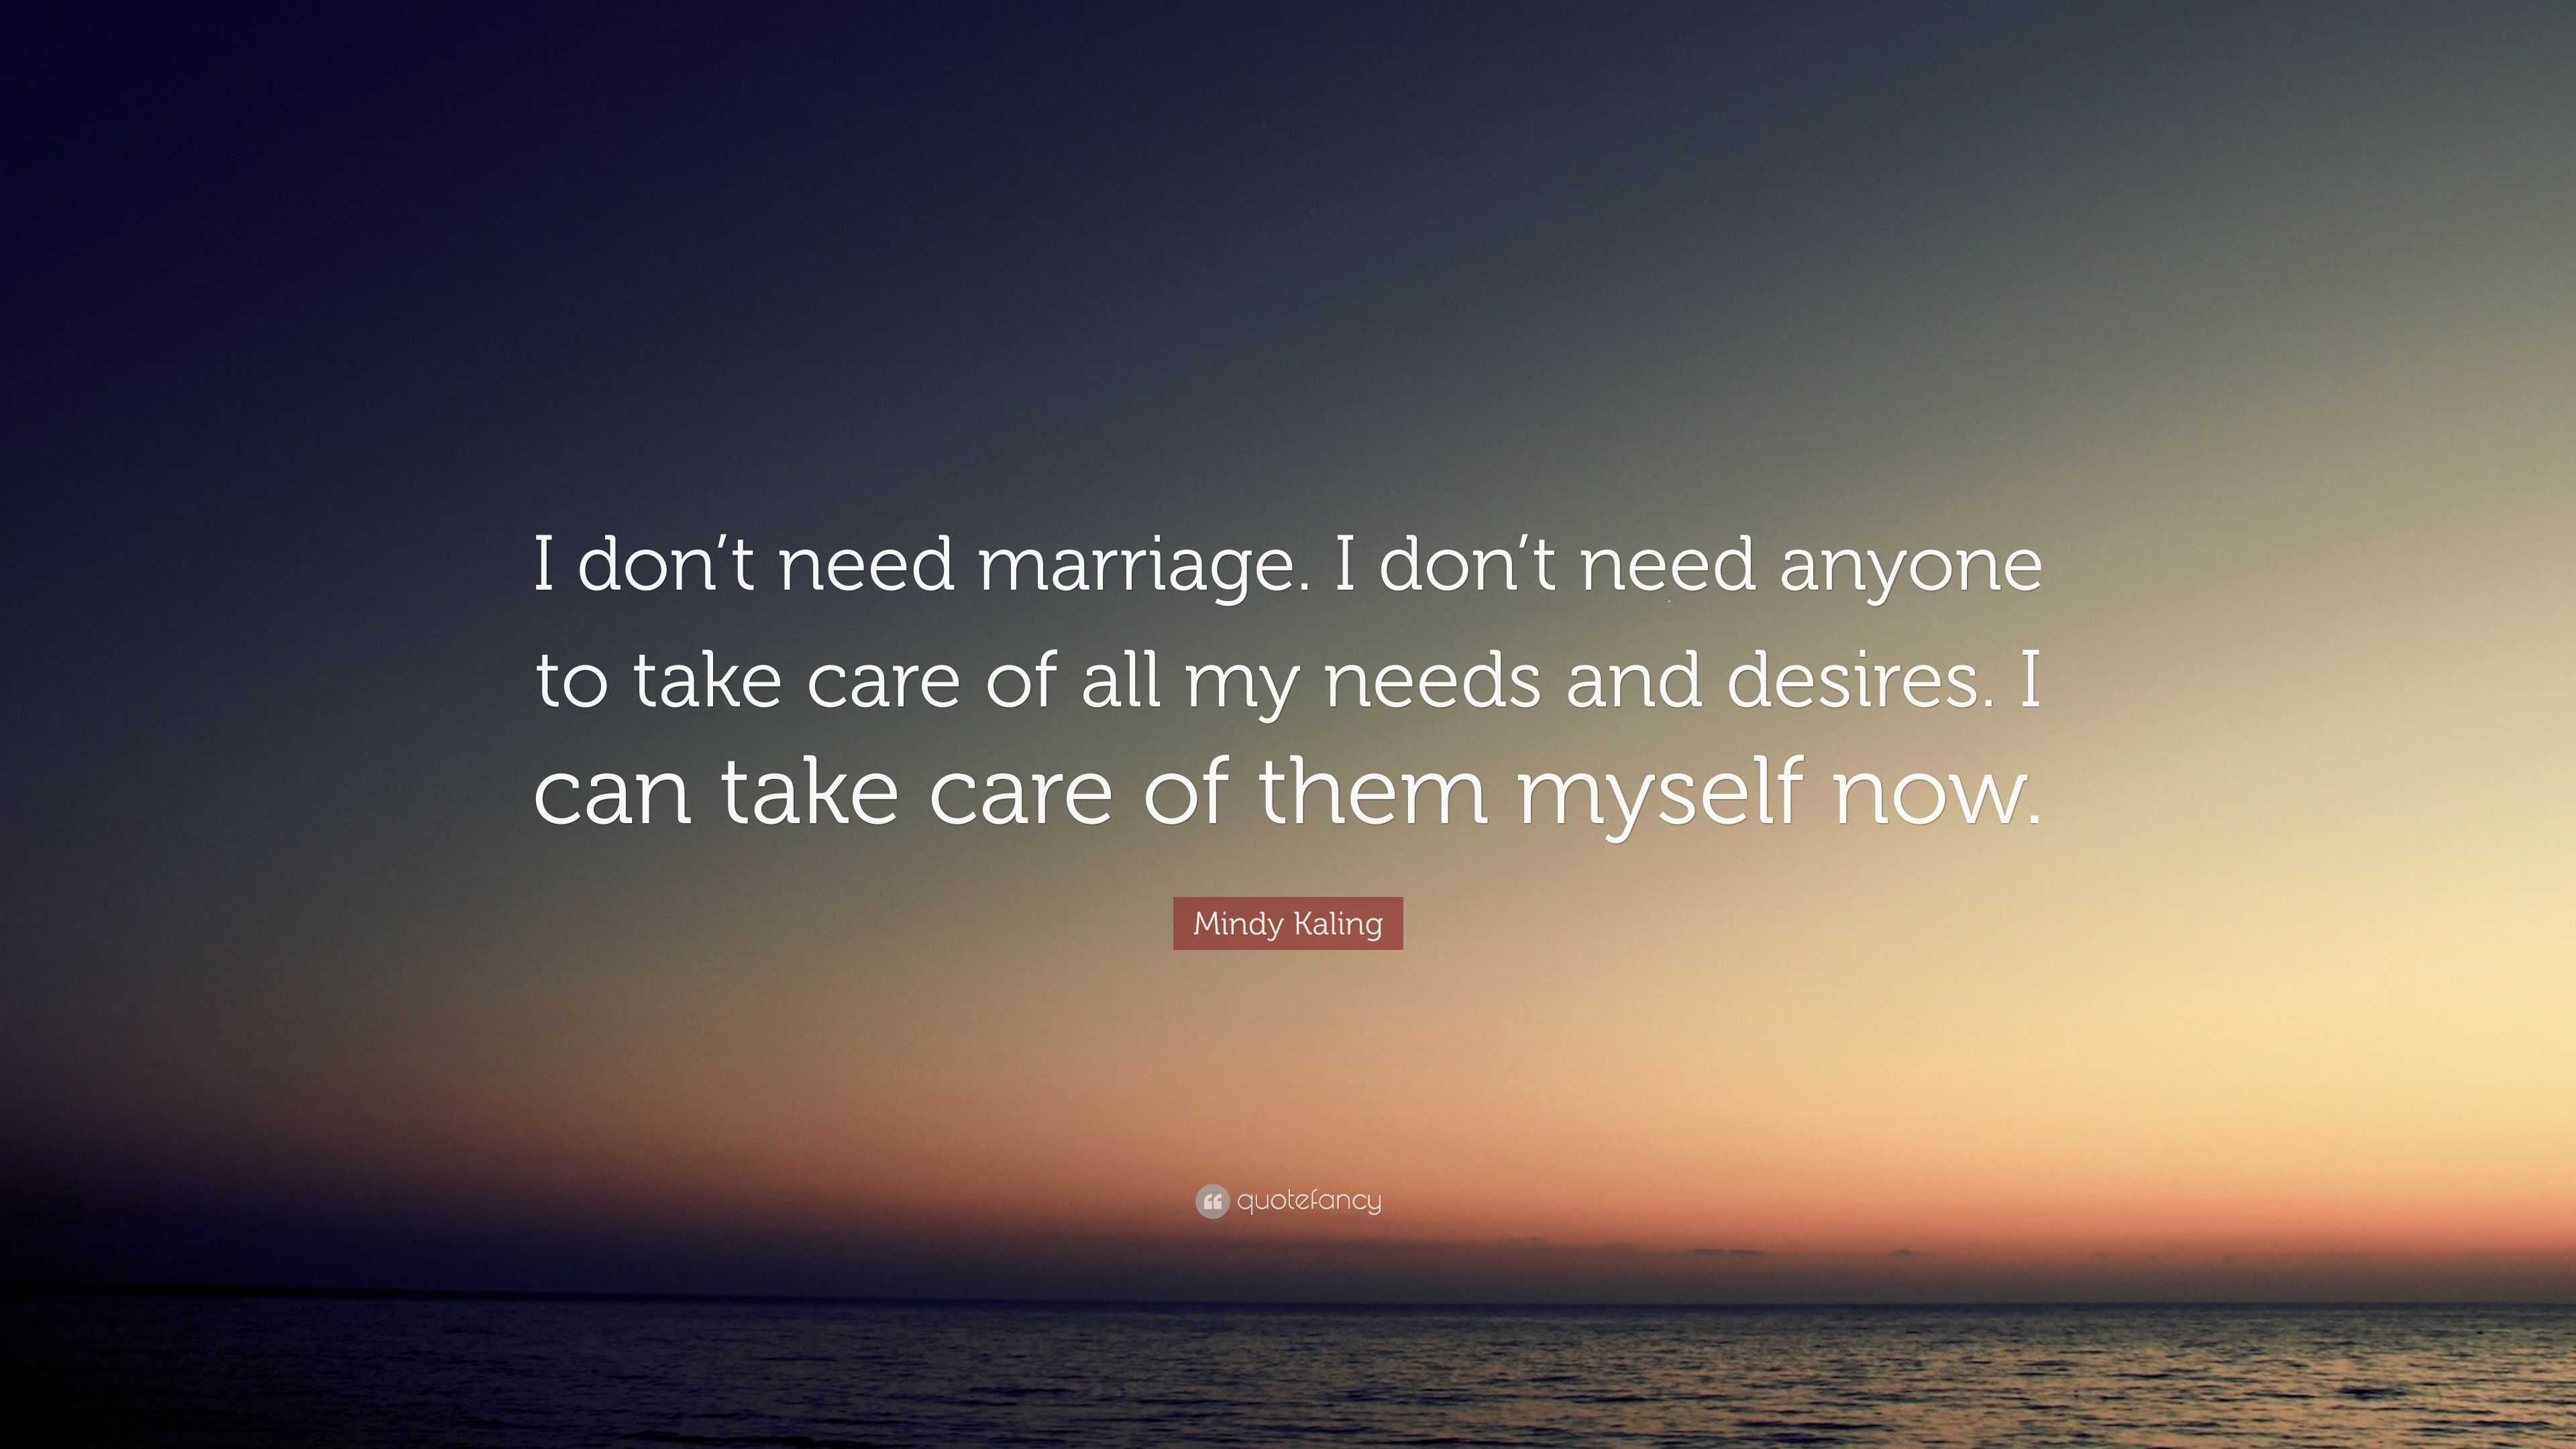 Mindy Kaling Quote: “I don’t need marriage. I don’t need anyone to take ...